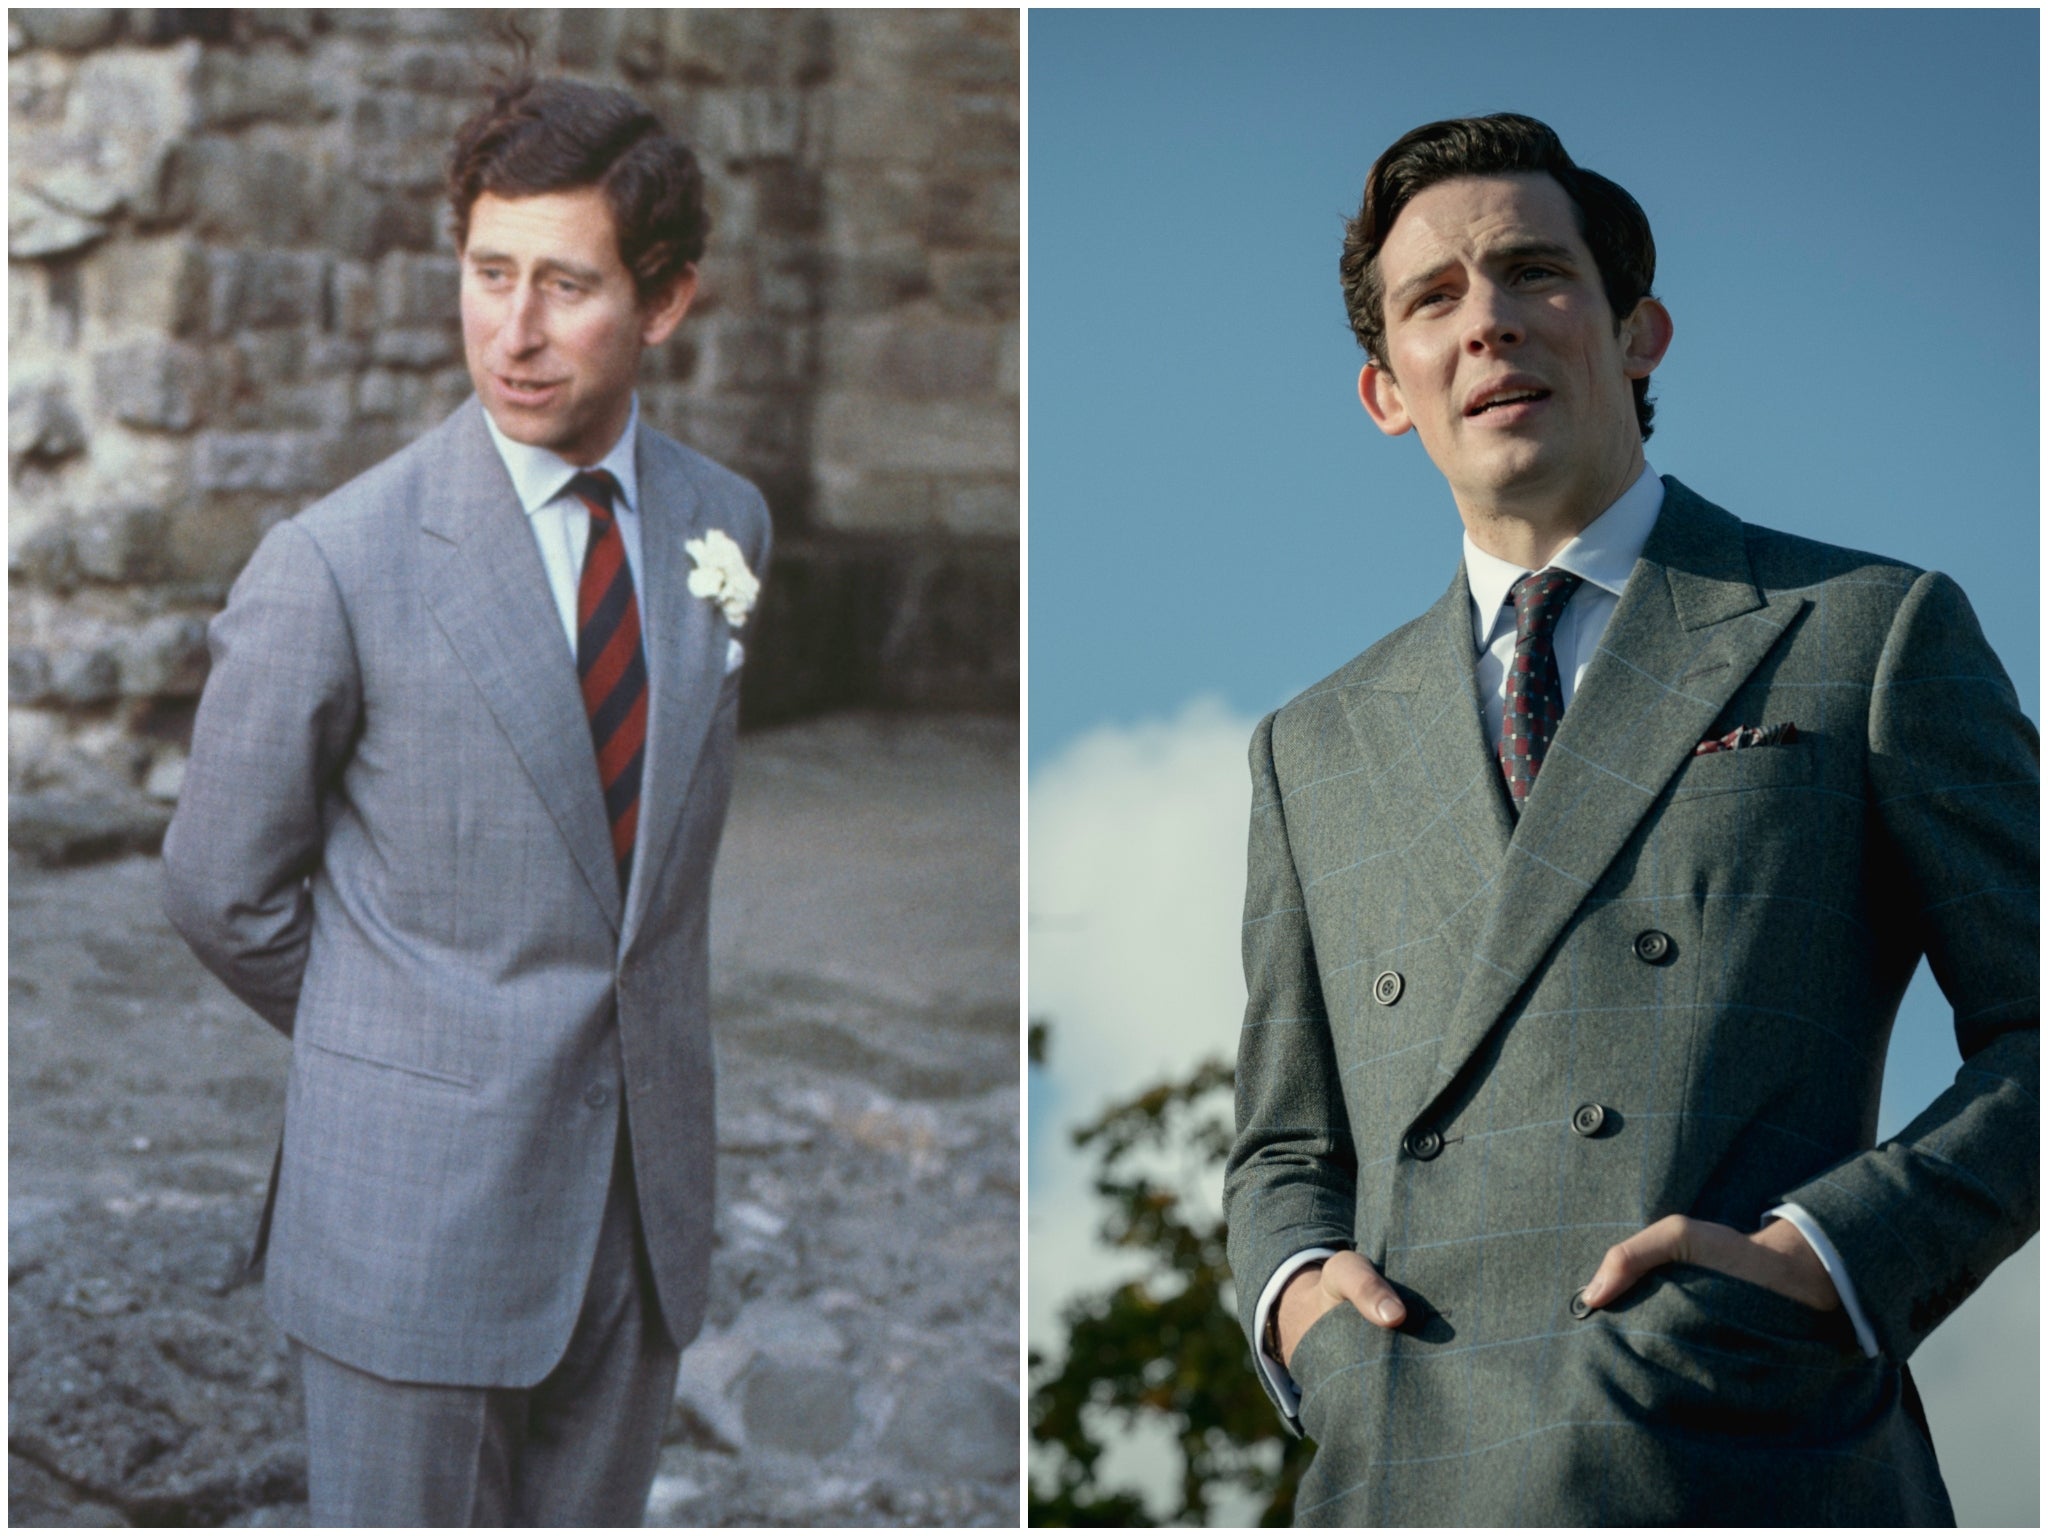 Prince Charles in 1981, Josh O’Connor in ‘The Crown’ season four